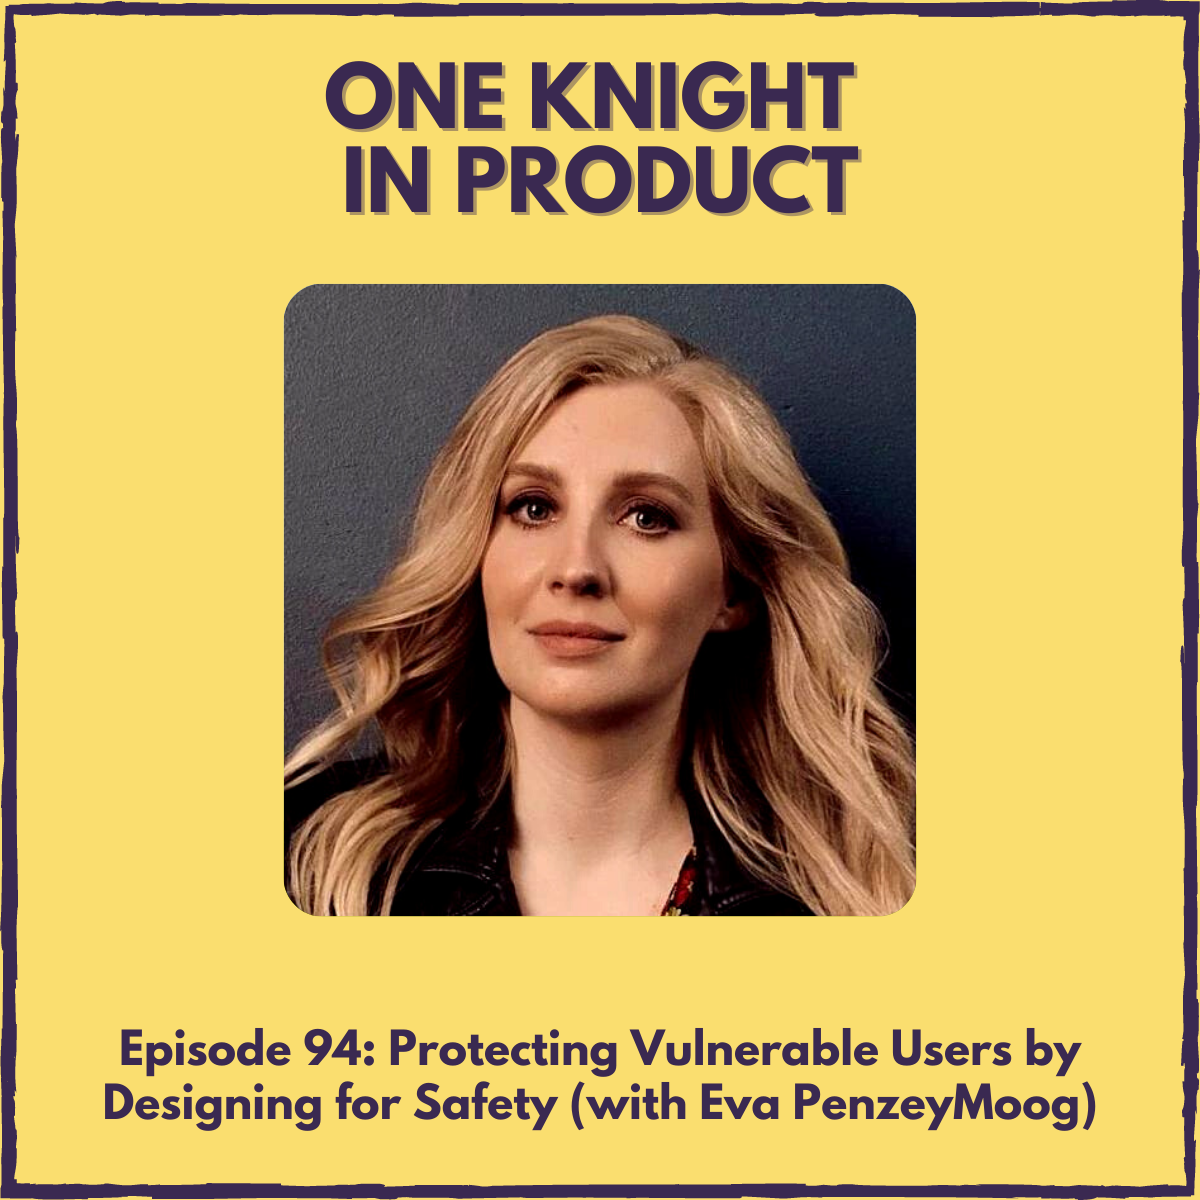 Protecting Vulnerable Users by Designing for Safety (with Eva PenzeyMoog, author ”Design for Safety”)